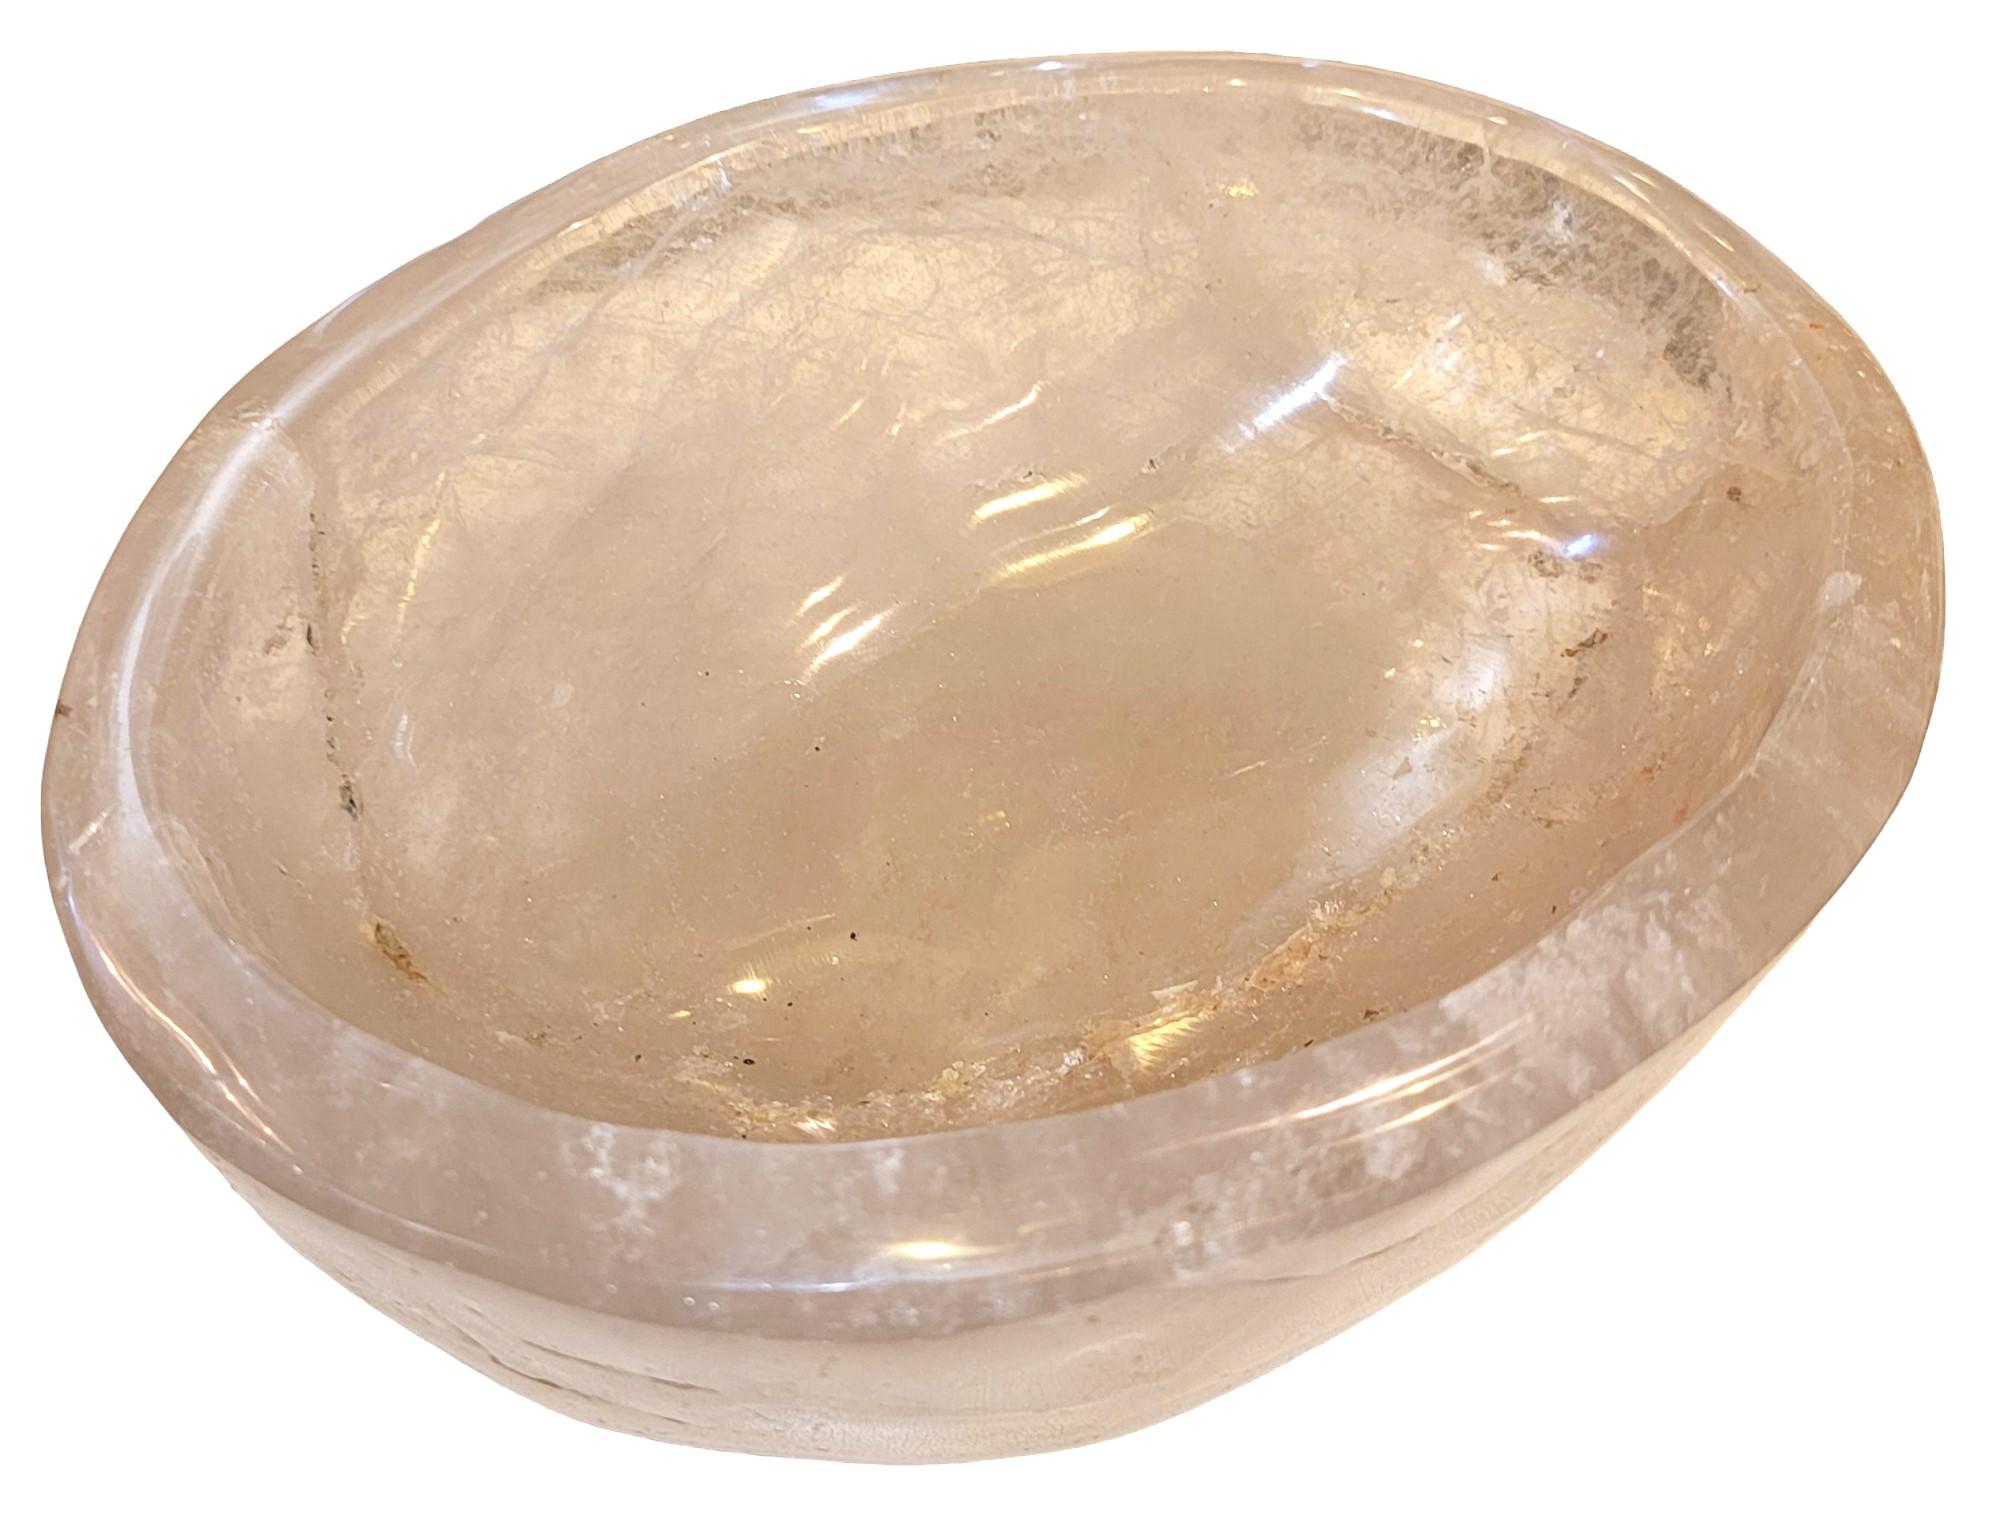 Mid-20th Century Vintage Italian Rock Crystal Hand Carved Bowl  For Sale